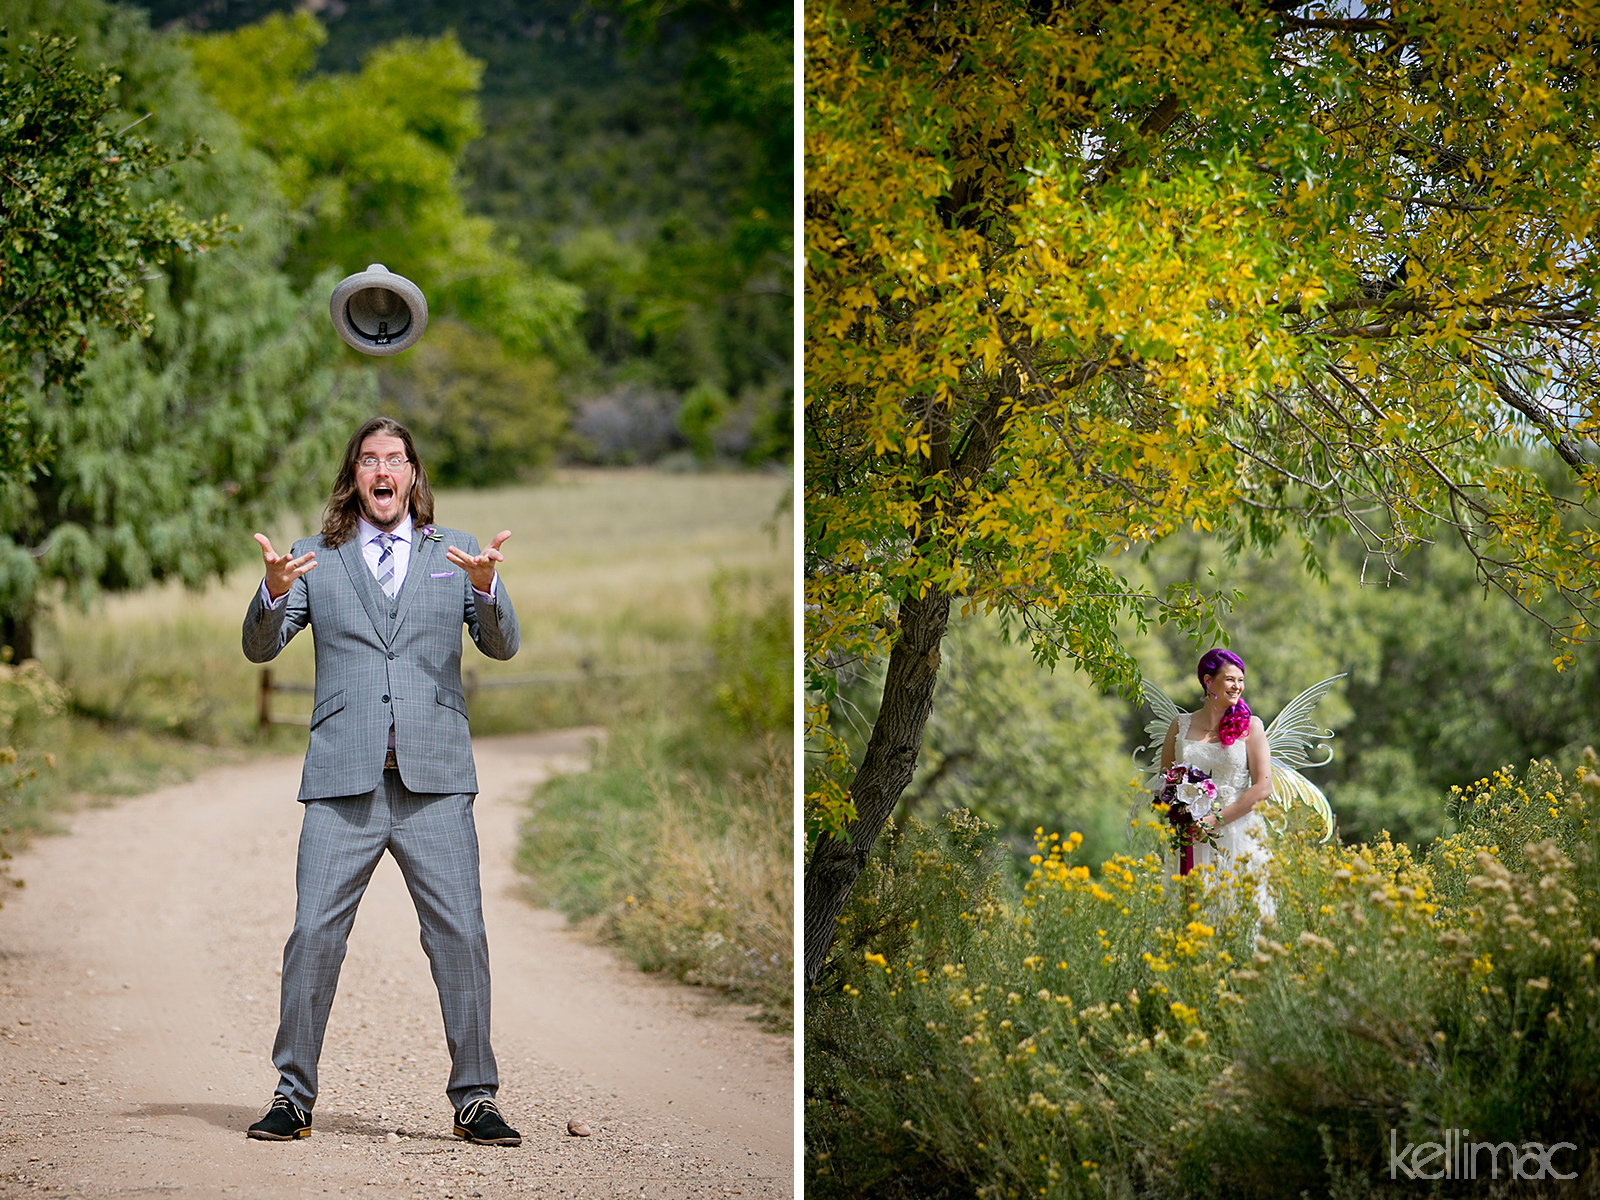 Russell throwing his hat - Ingrid is a fairy bride - Clear Creek Family Ranch Wedding Southern Utah - Photos by Kelli Maguire - www.kellimac.com